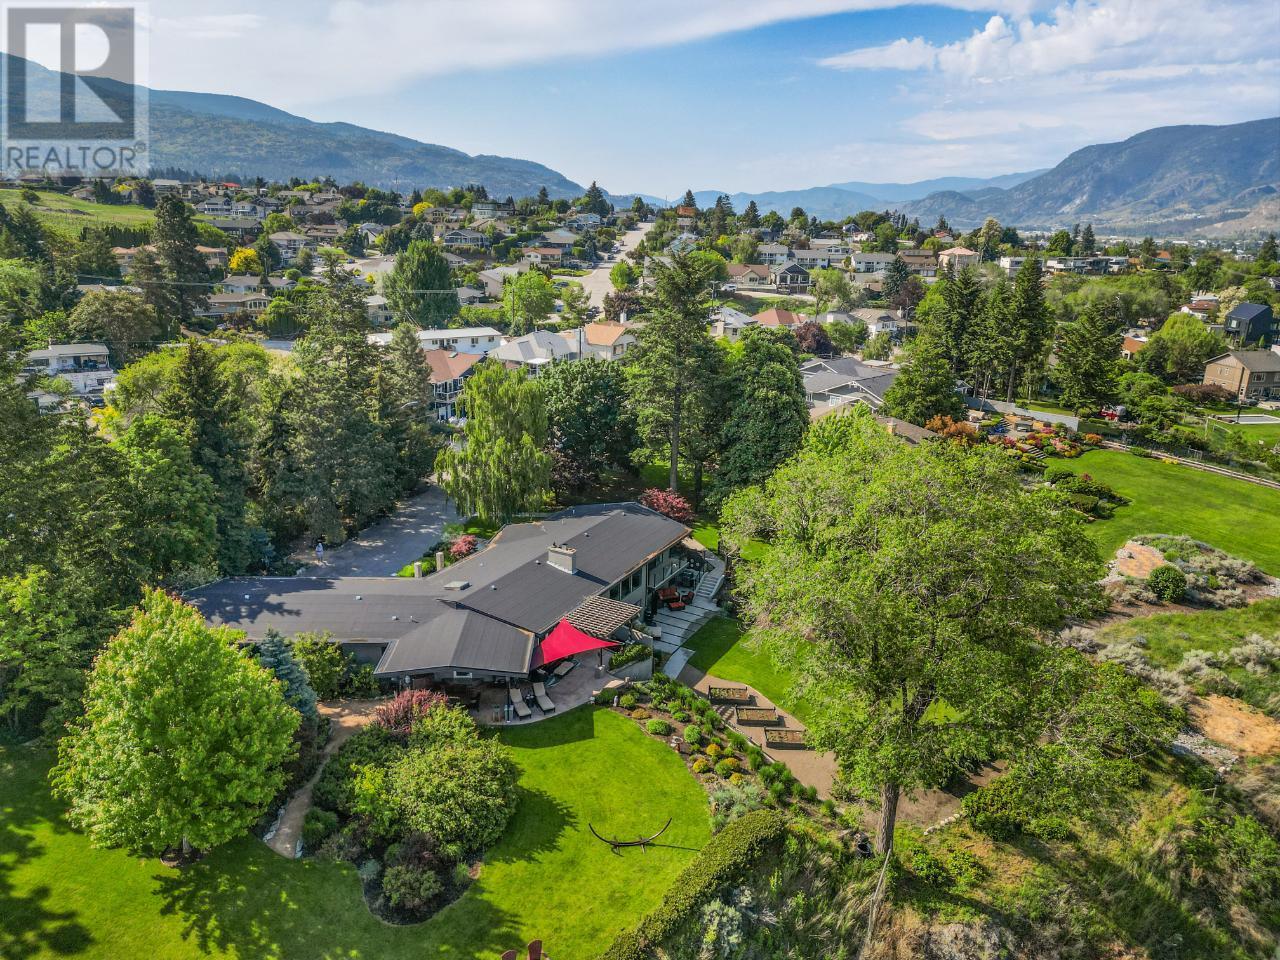      150 VANCOUVER Place  , Penticton, South Okanagan,  ;  Listing Number: MLS 200291